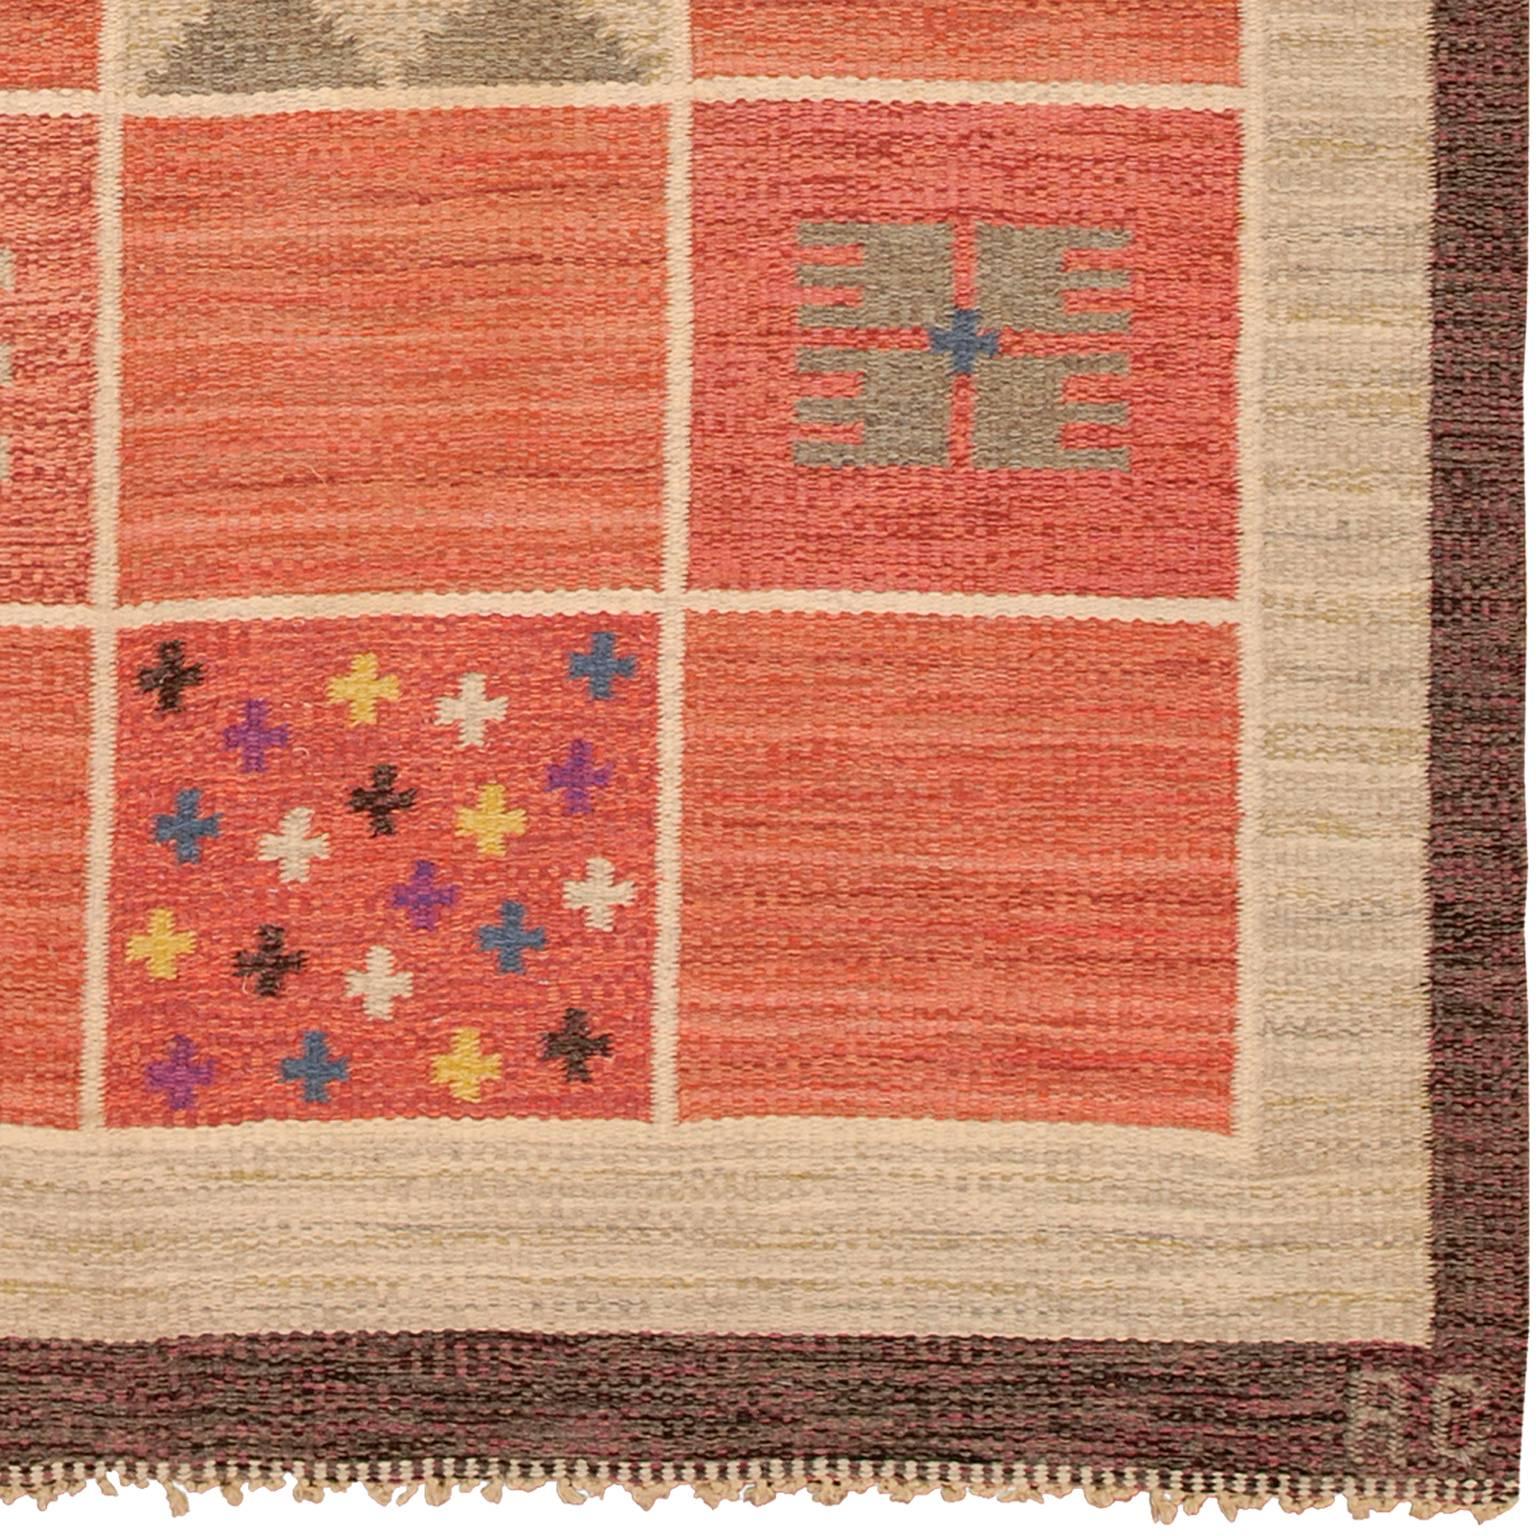 Mid-20th century Swedish flat-weave rug
Sweden, circa 1950
Initialed: RC
Handwoven.